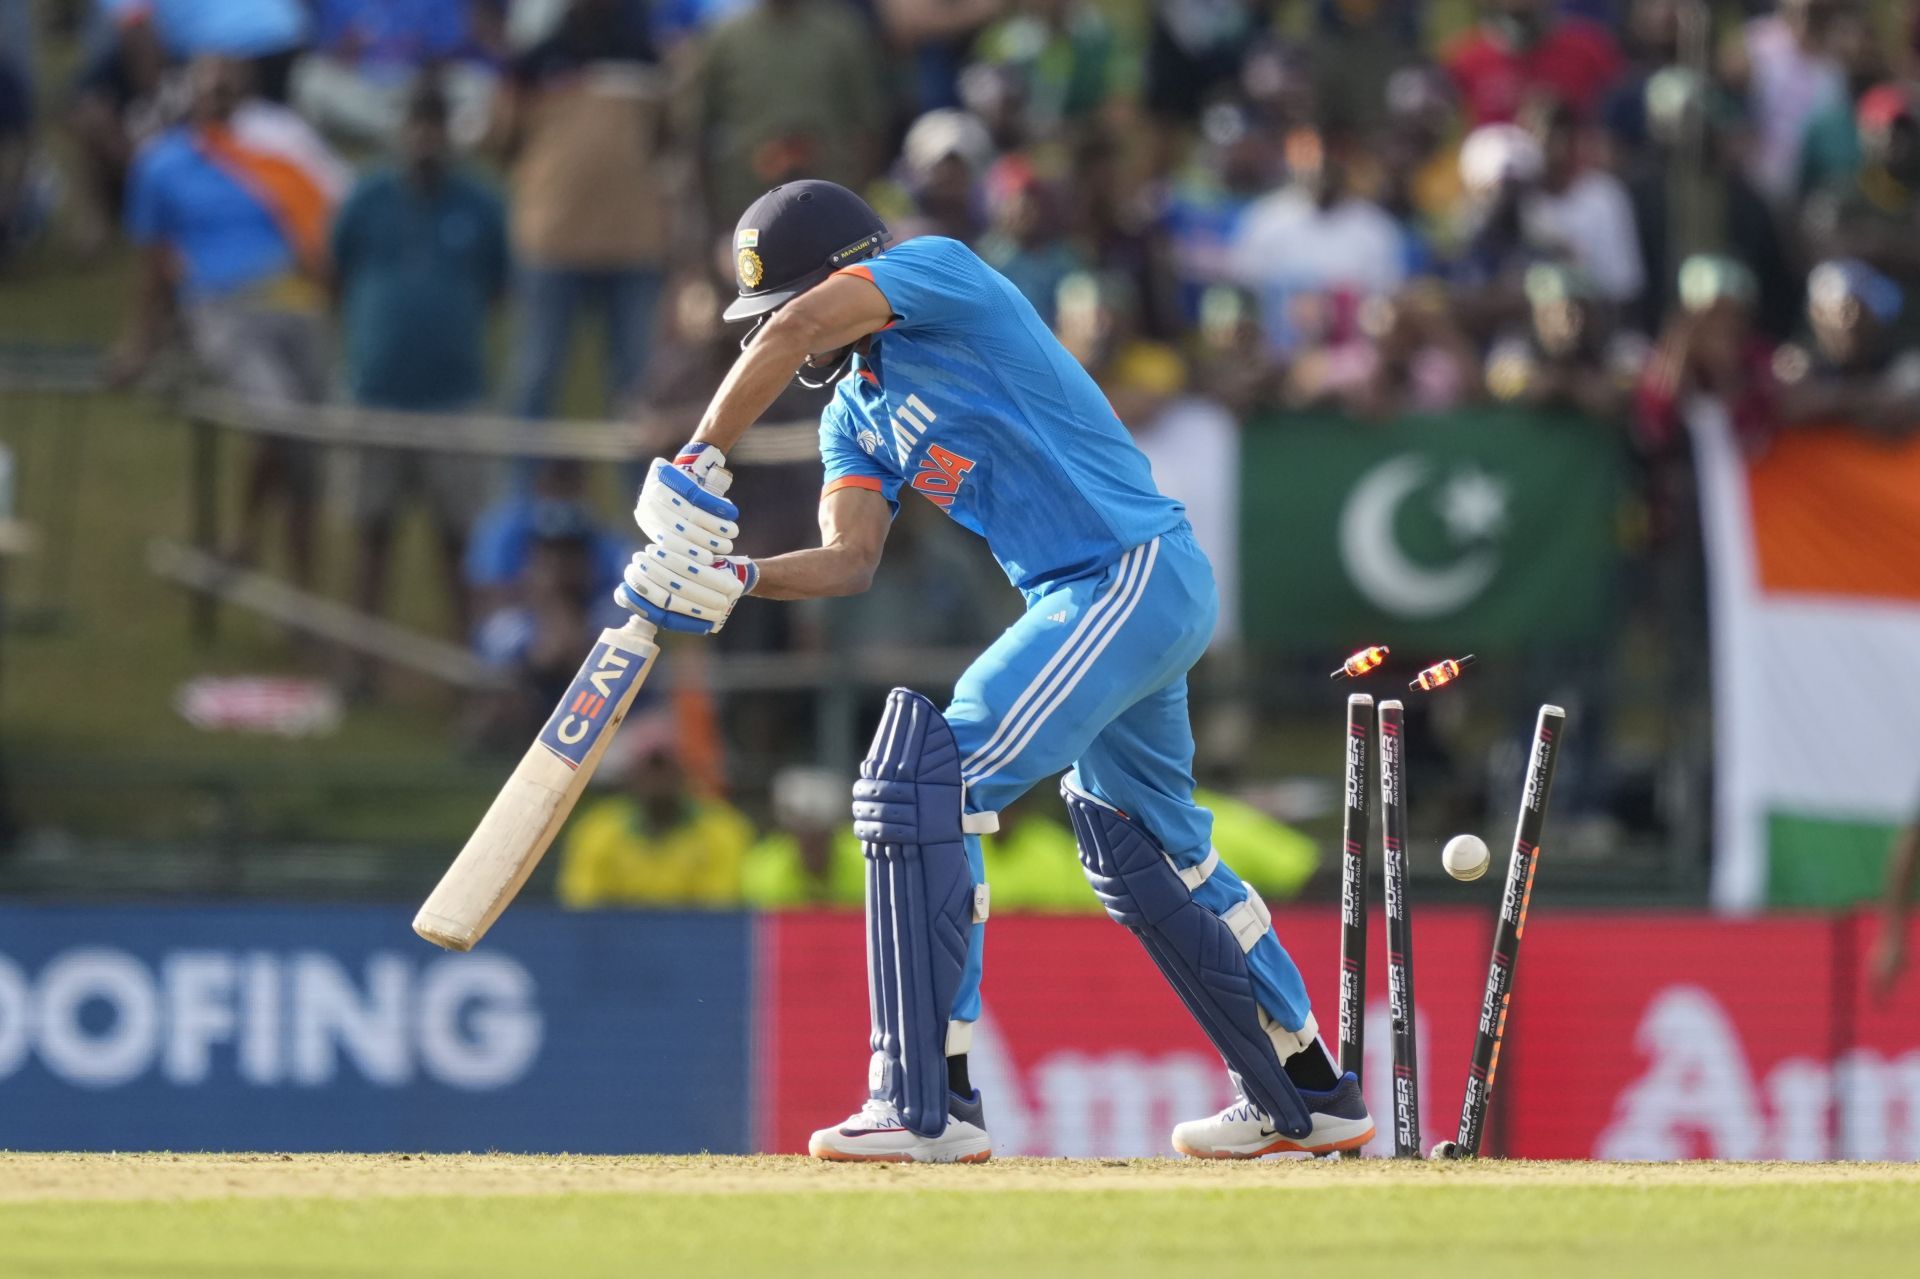 Shubman Gill looked out of sorts against Pakistan. [P/C: AP]